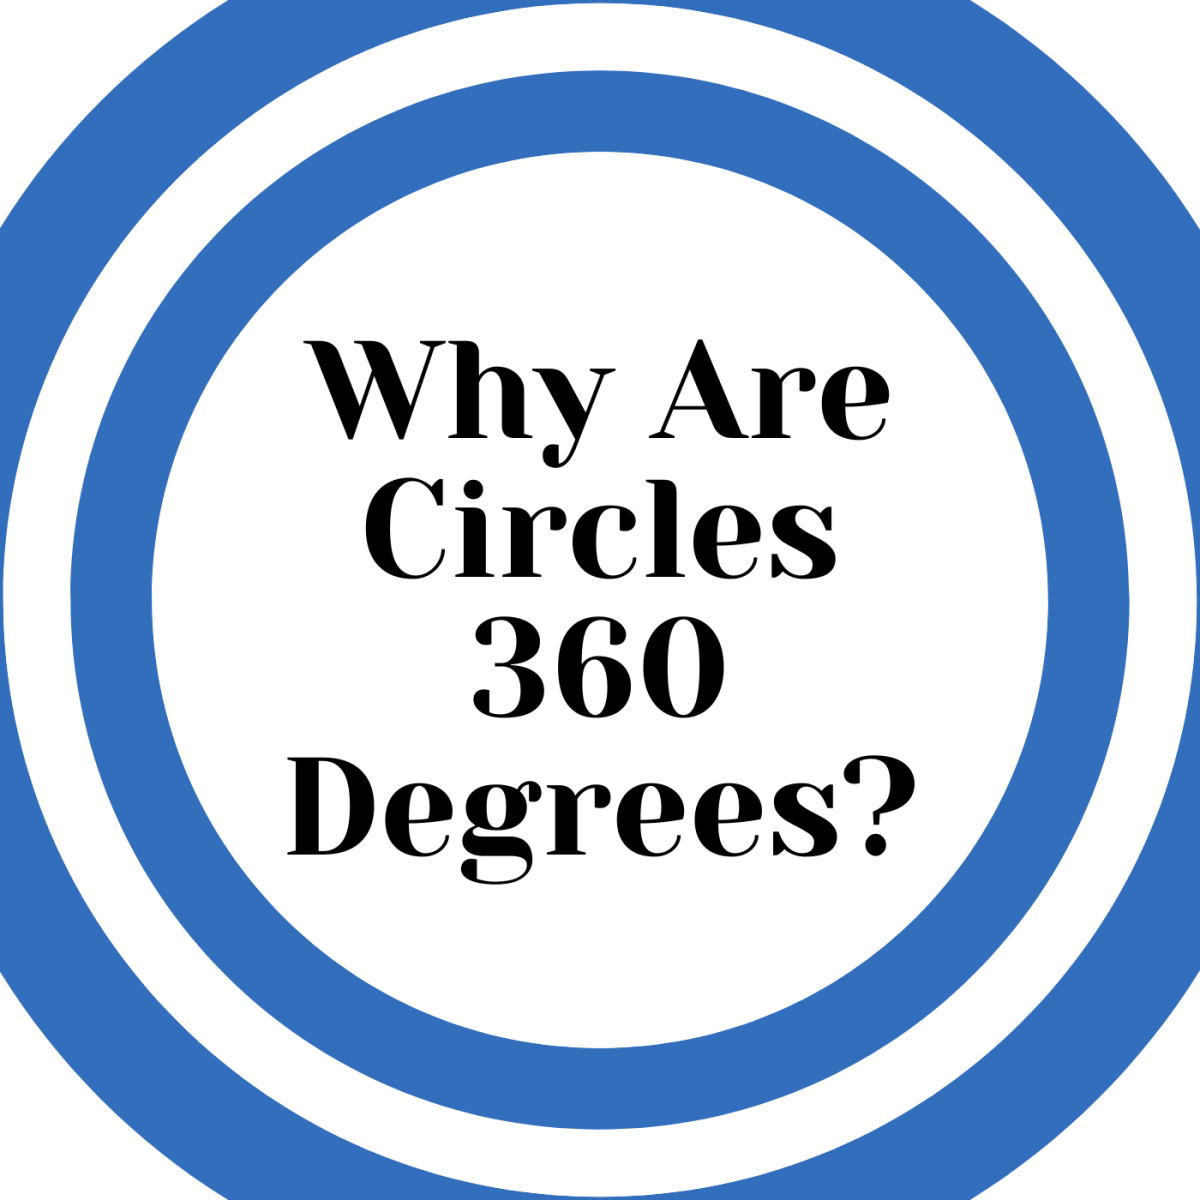 Why are circles 360 degrees? 